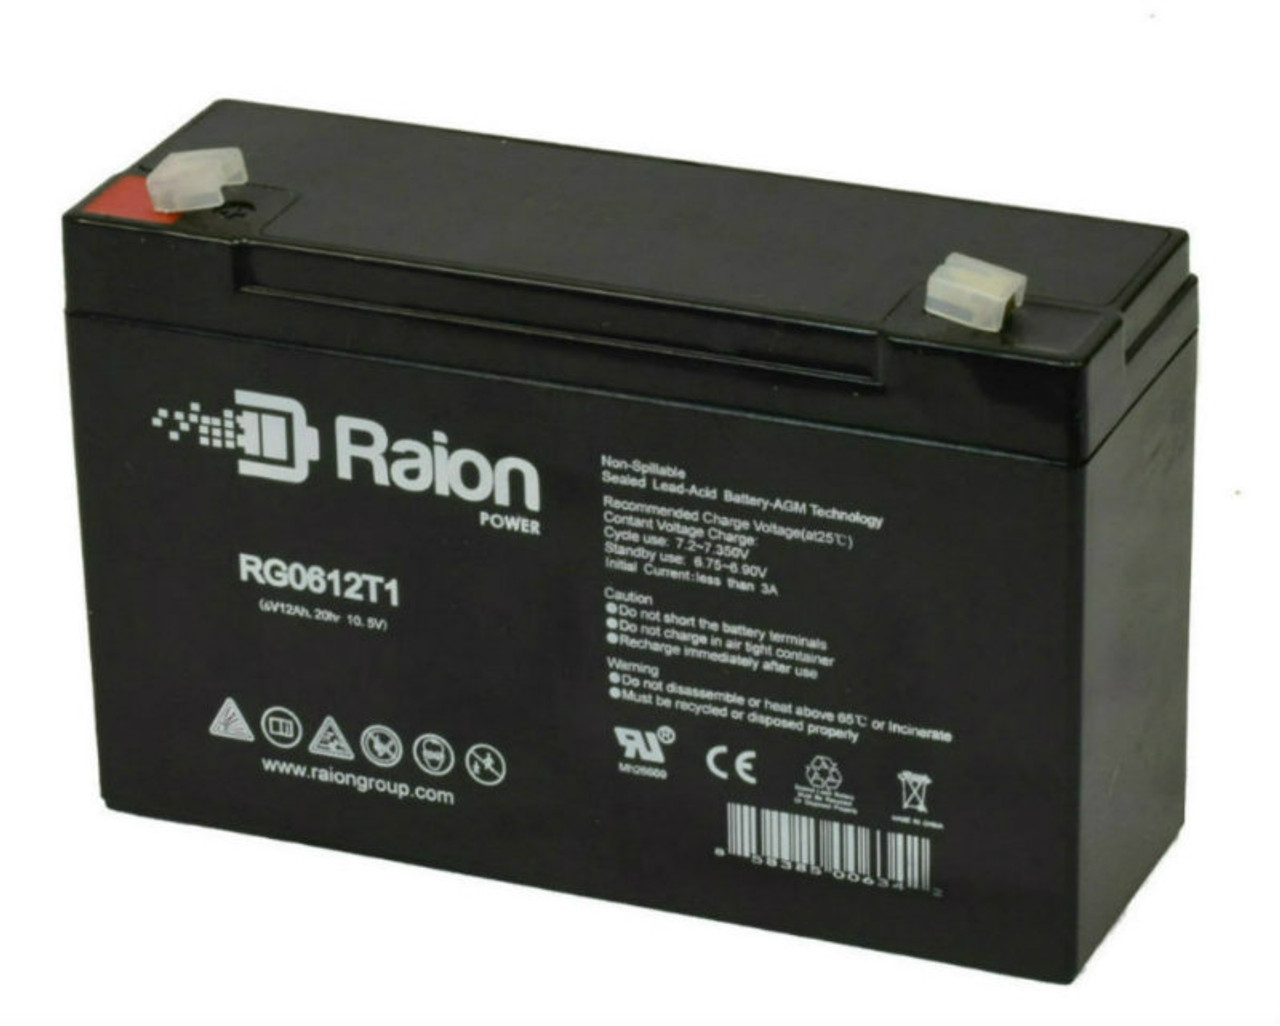 Raion Power RG06120T1 Replacement 6V 12Ah Emergency Light Battery for Light Alarms 605P1